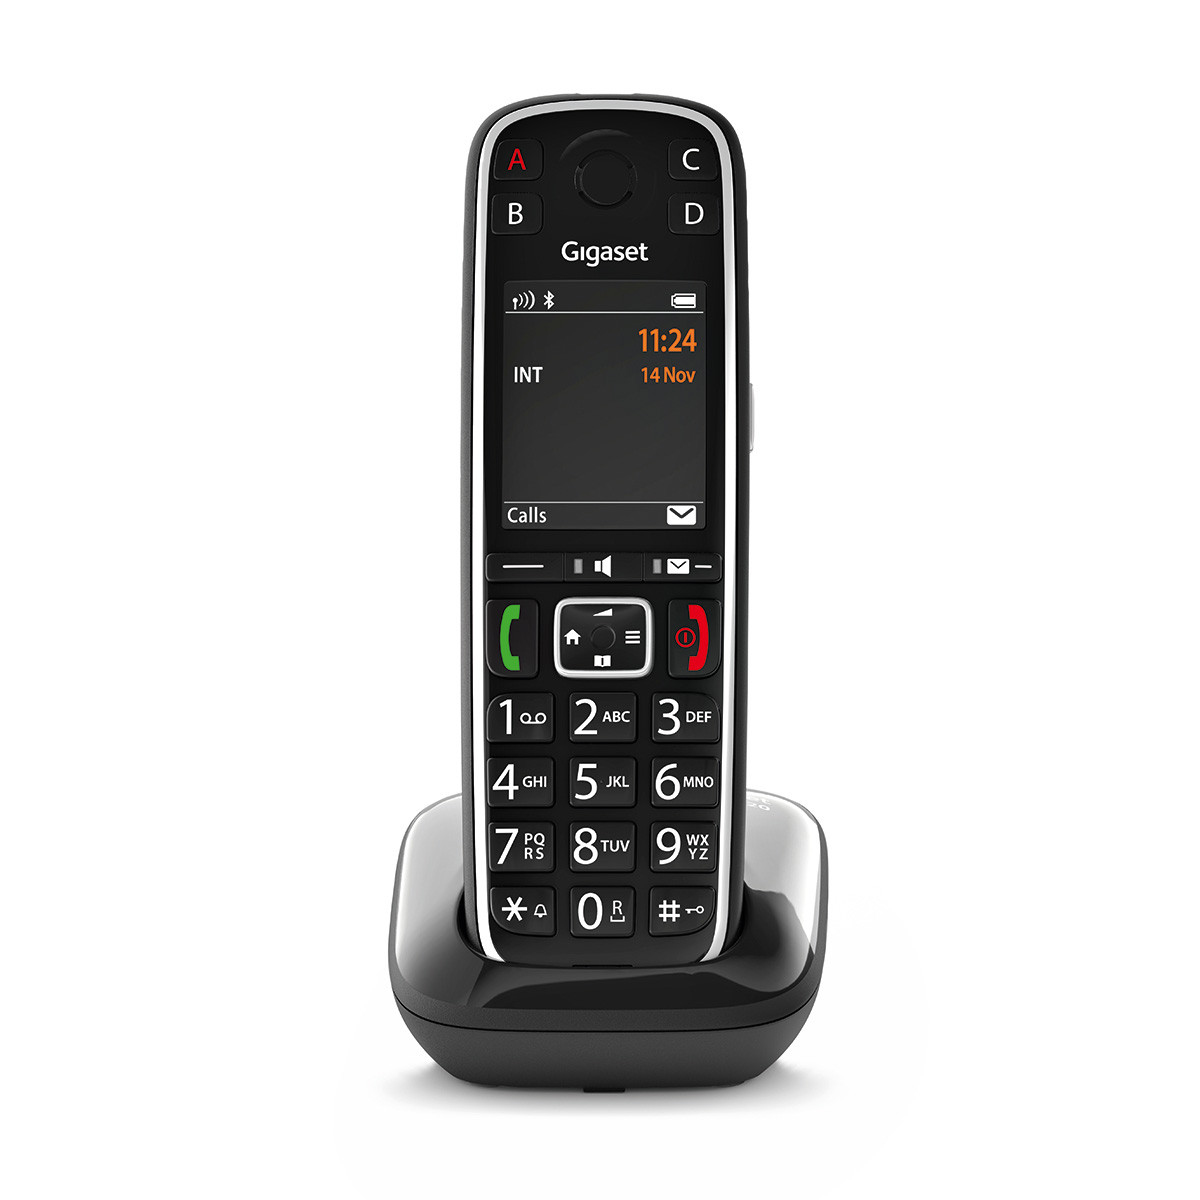 S30852-H2903-B101 UNIFY GIGASET OPENSTAGE E720 - Analog/DECT telephone - Wireless handset - 200 entries - Caller ID - Short Message Service (SMS) - Black